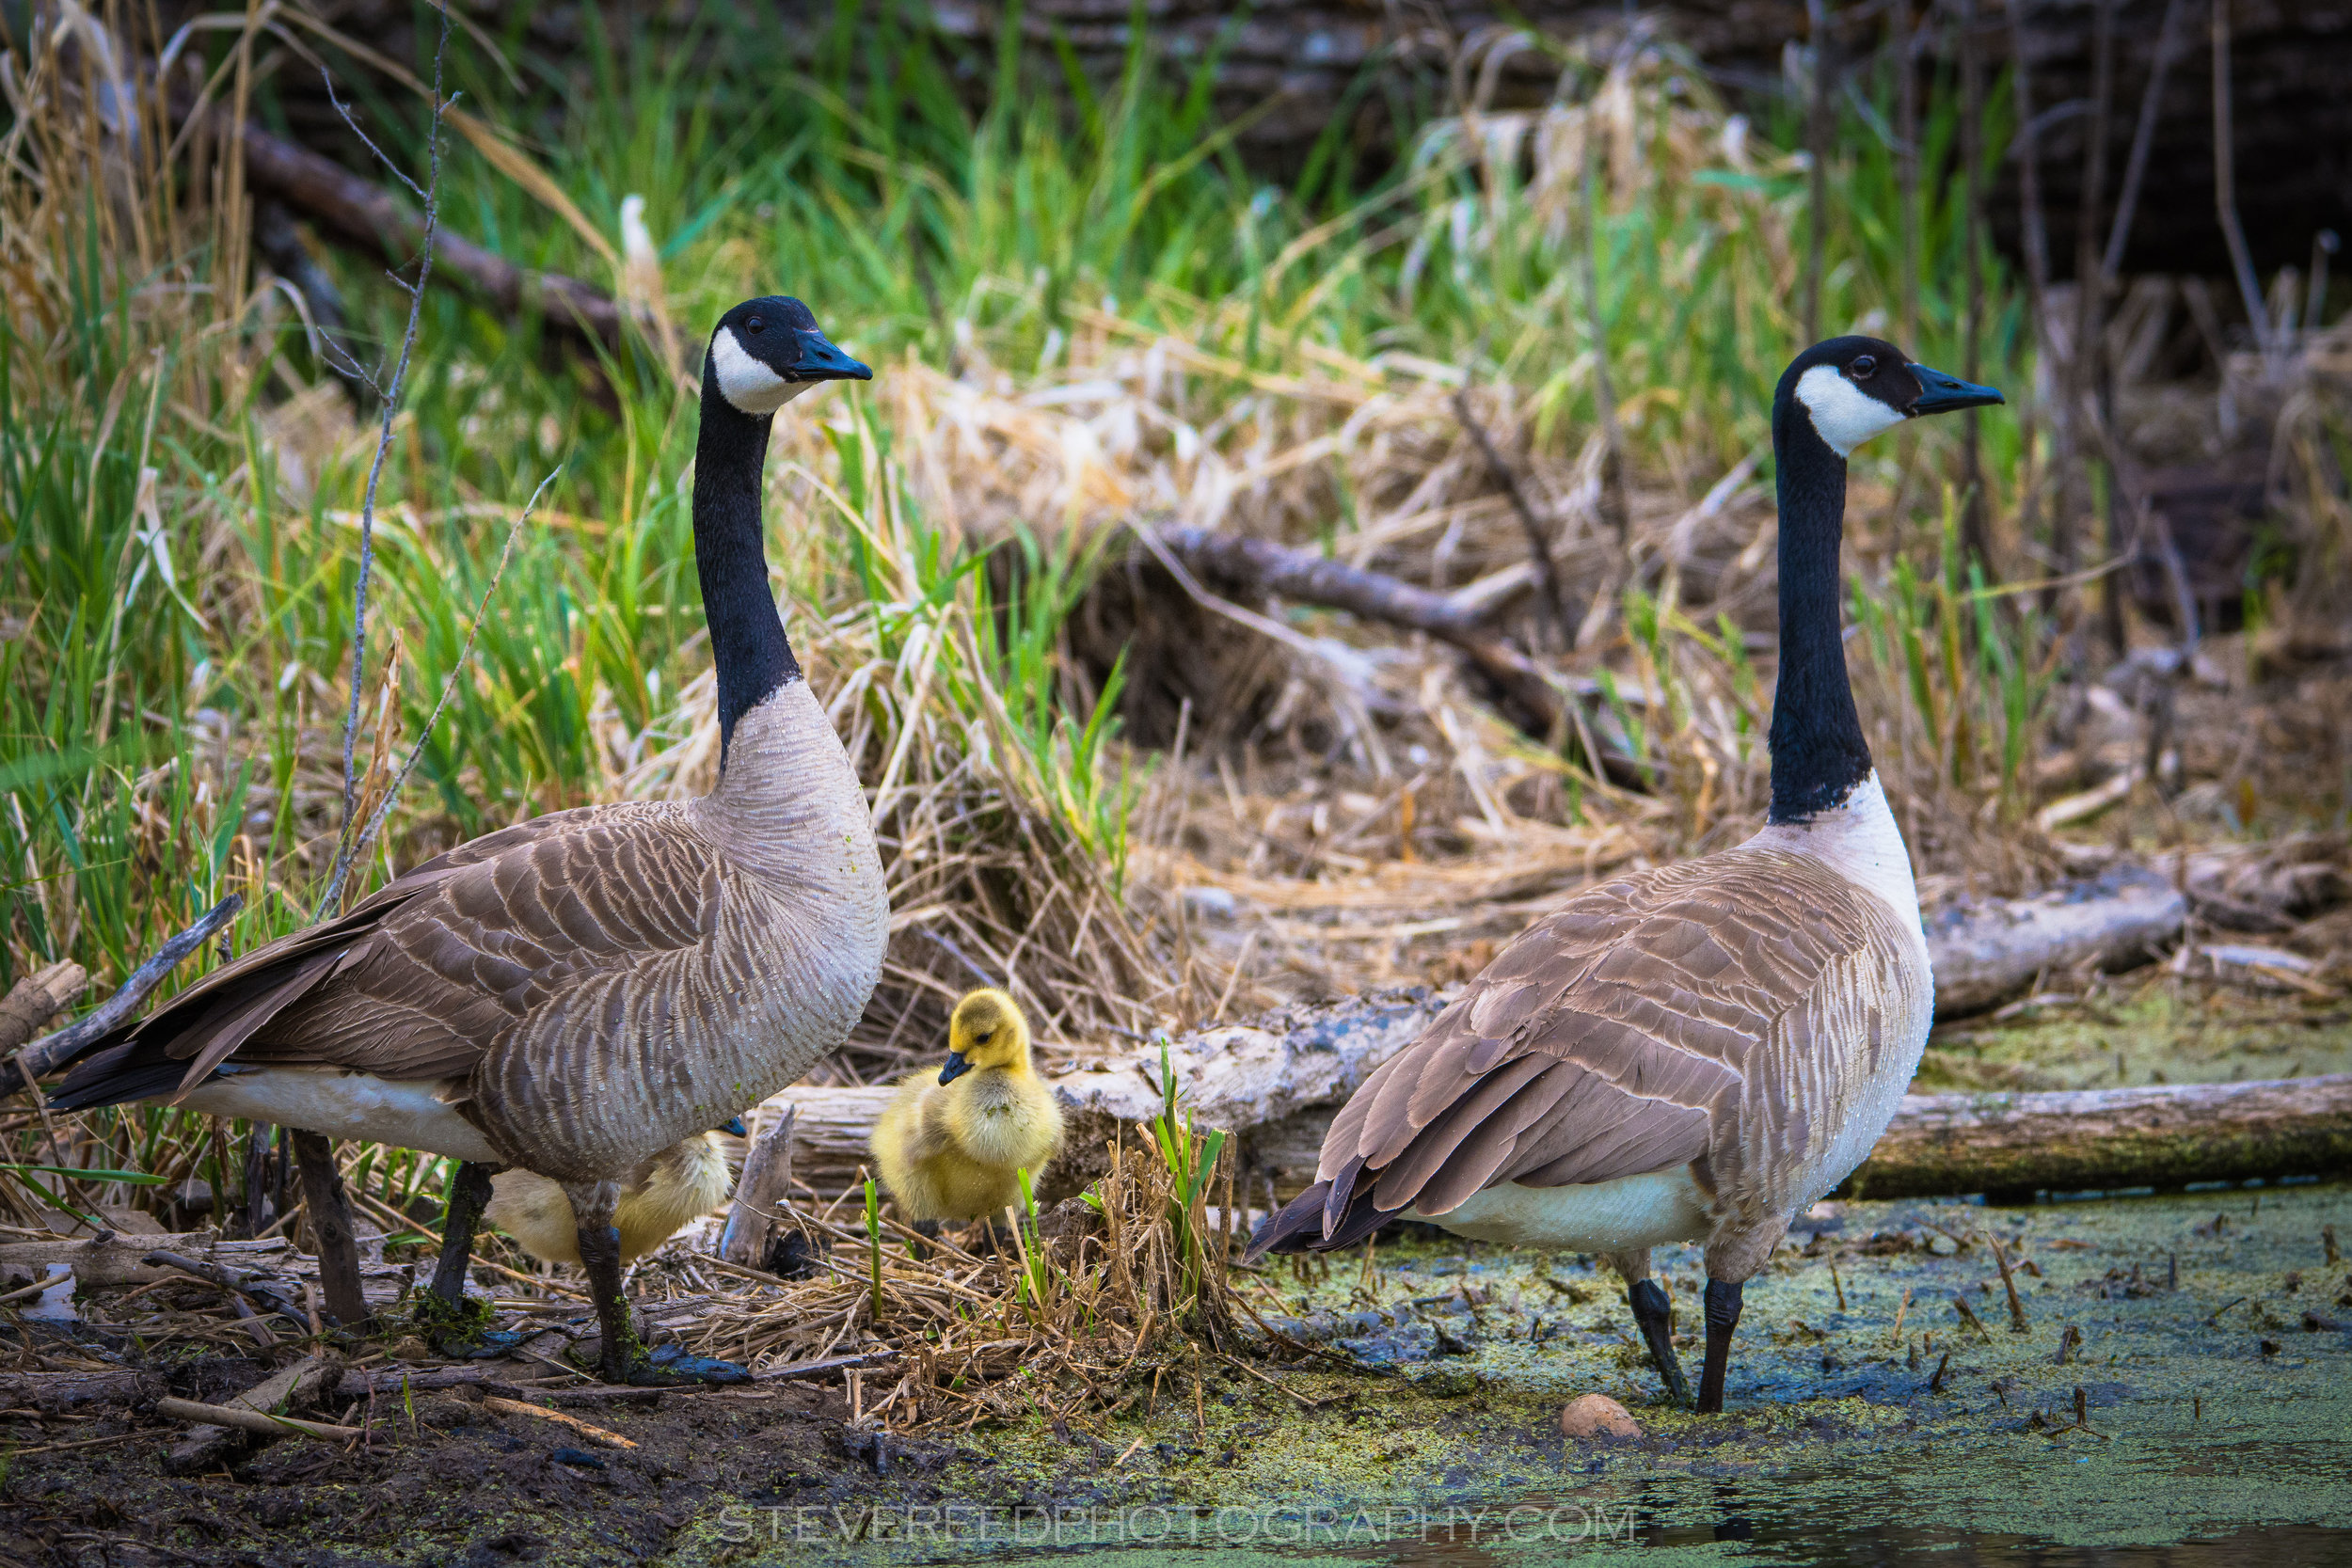 Family of Canada Geese